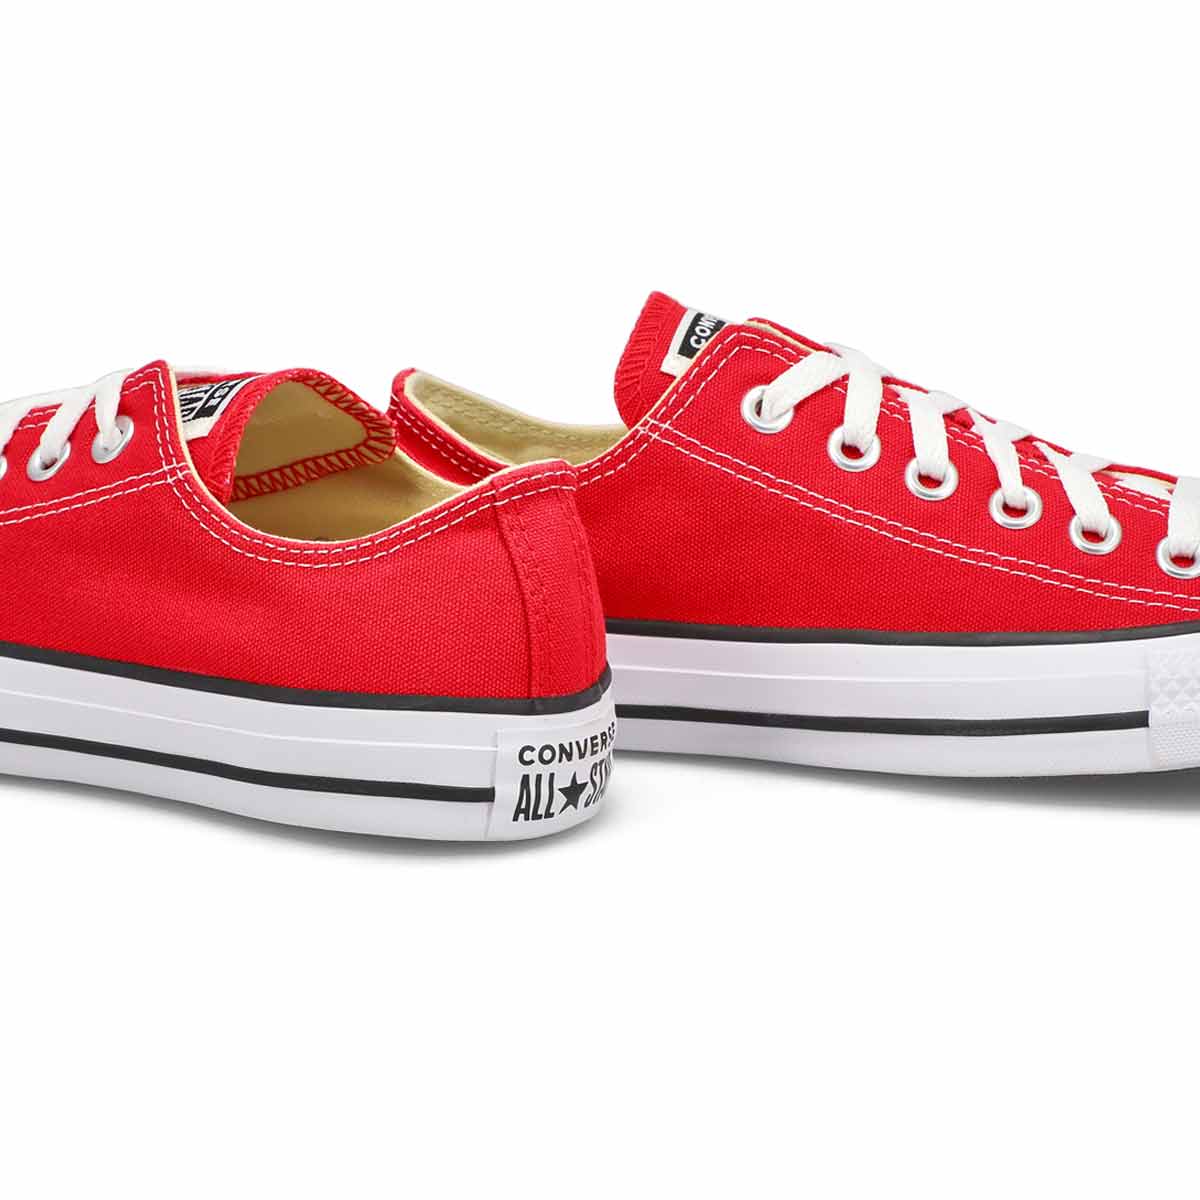 Women's Chuck Taylor All Star Sneaker - Red